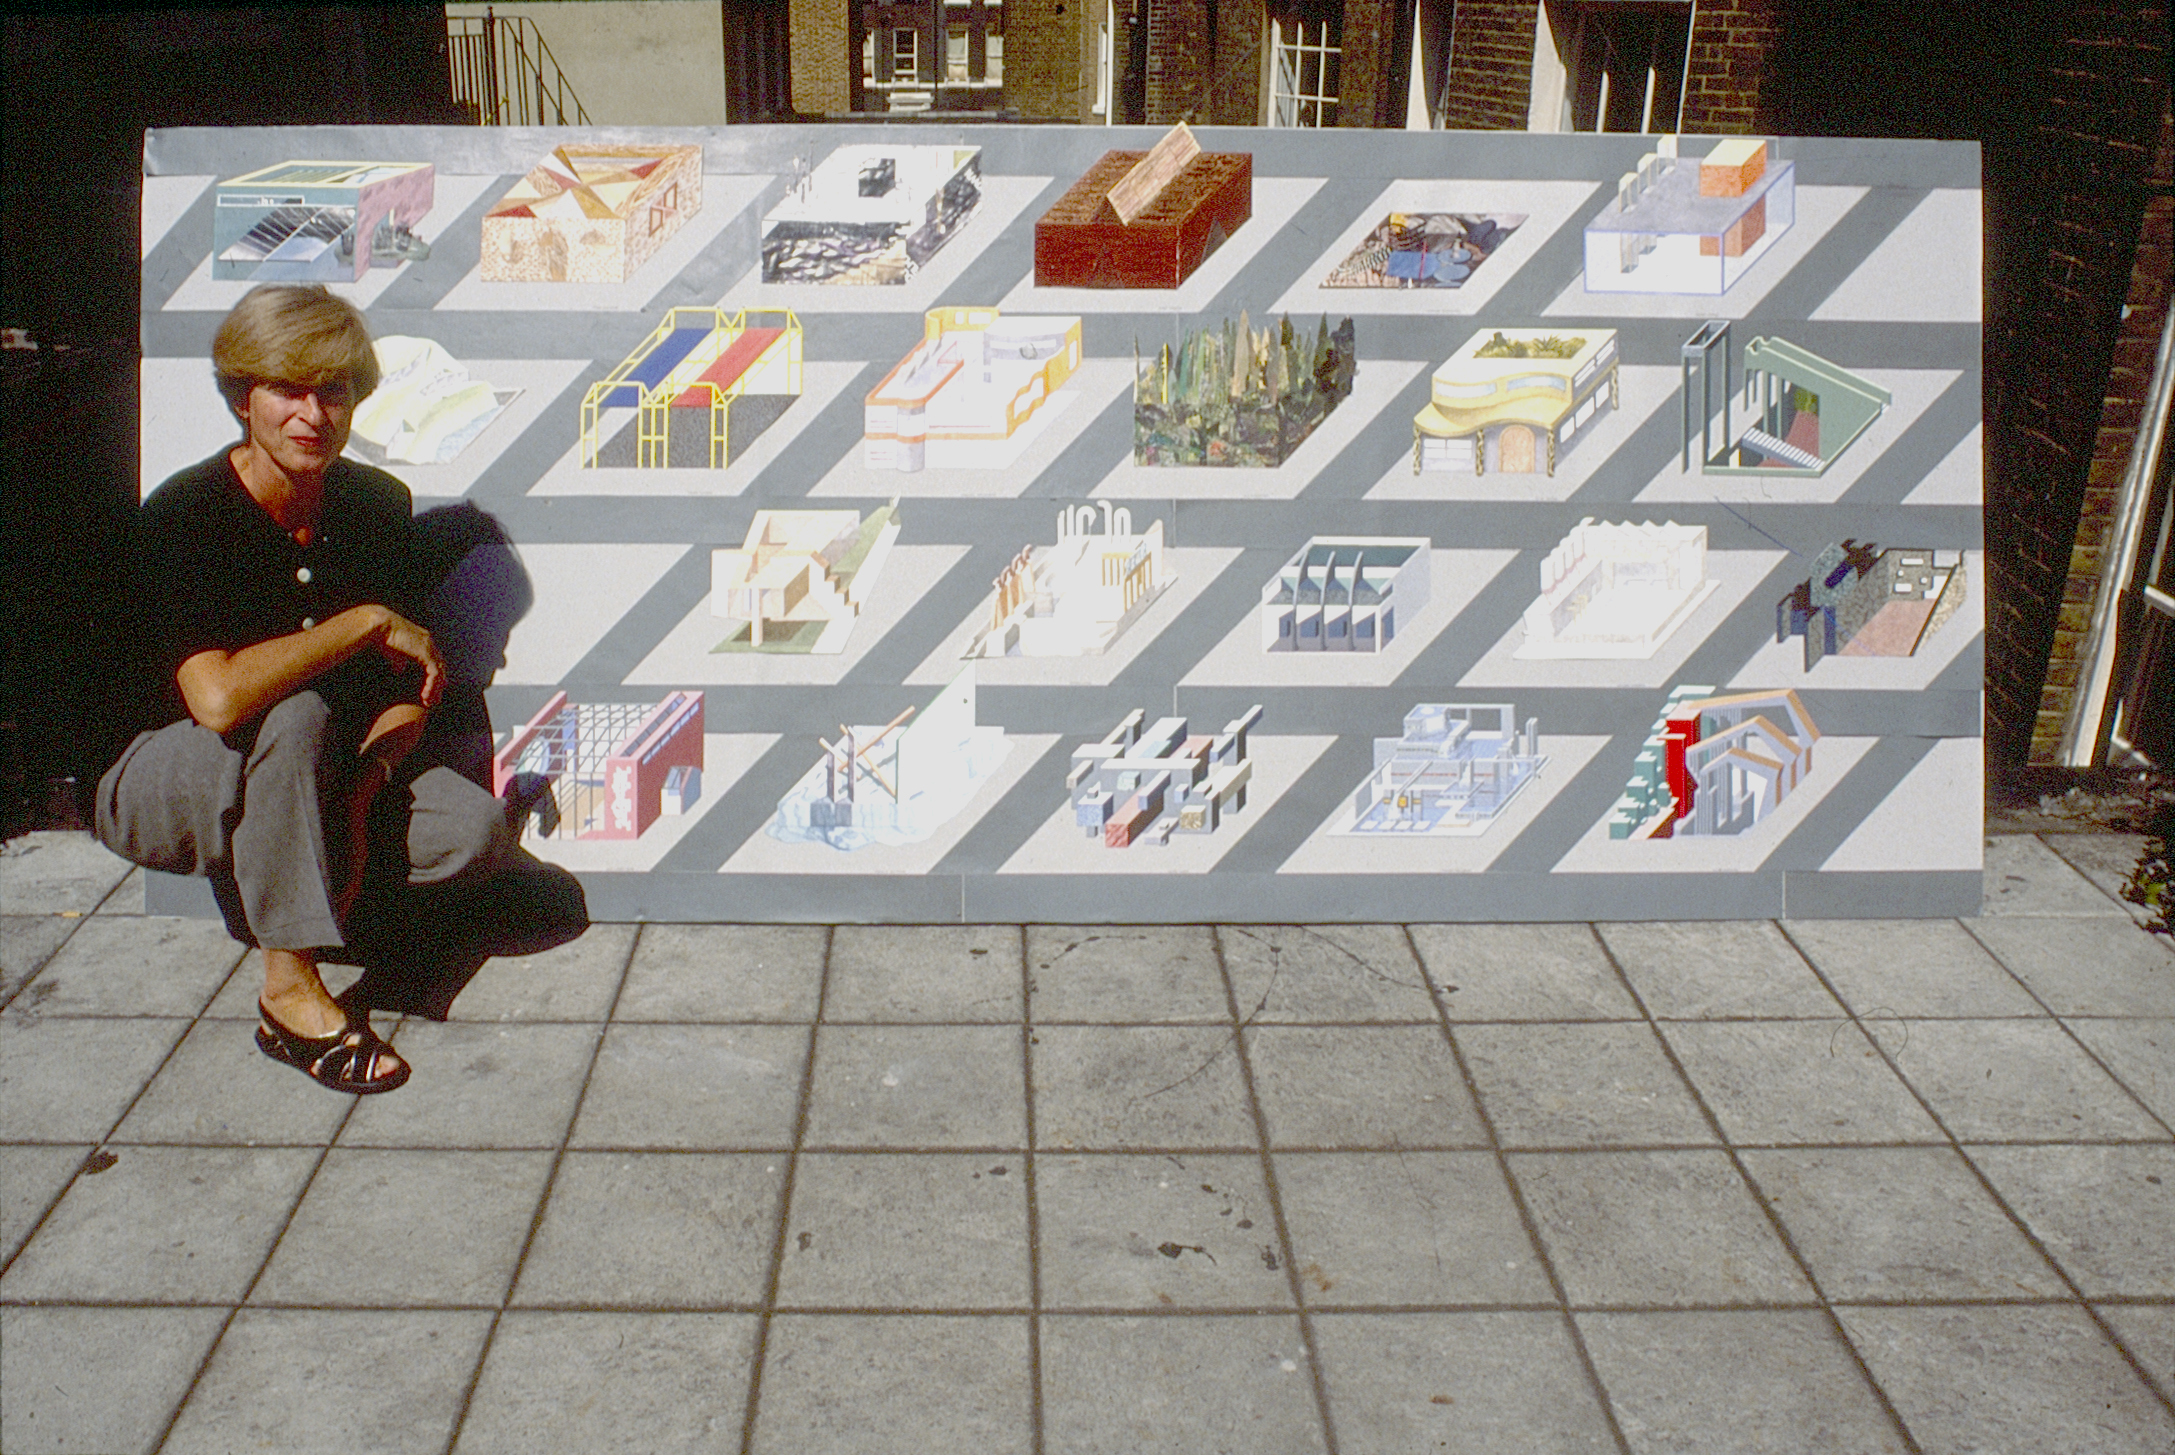 A picture of a woman kneeling in front of a board depicting different architectural plans.